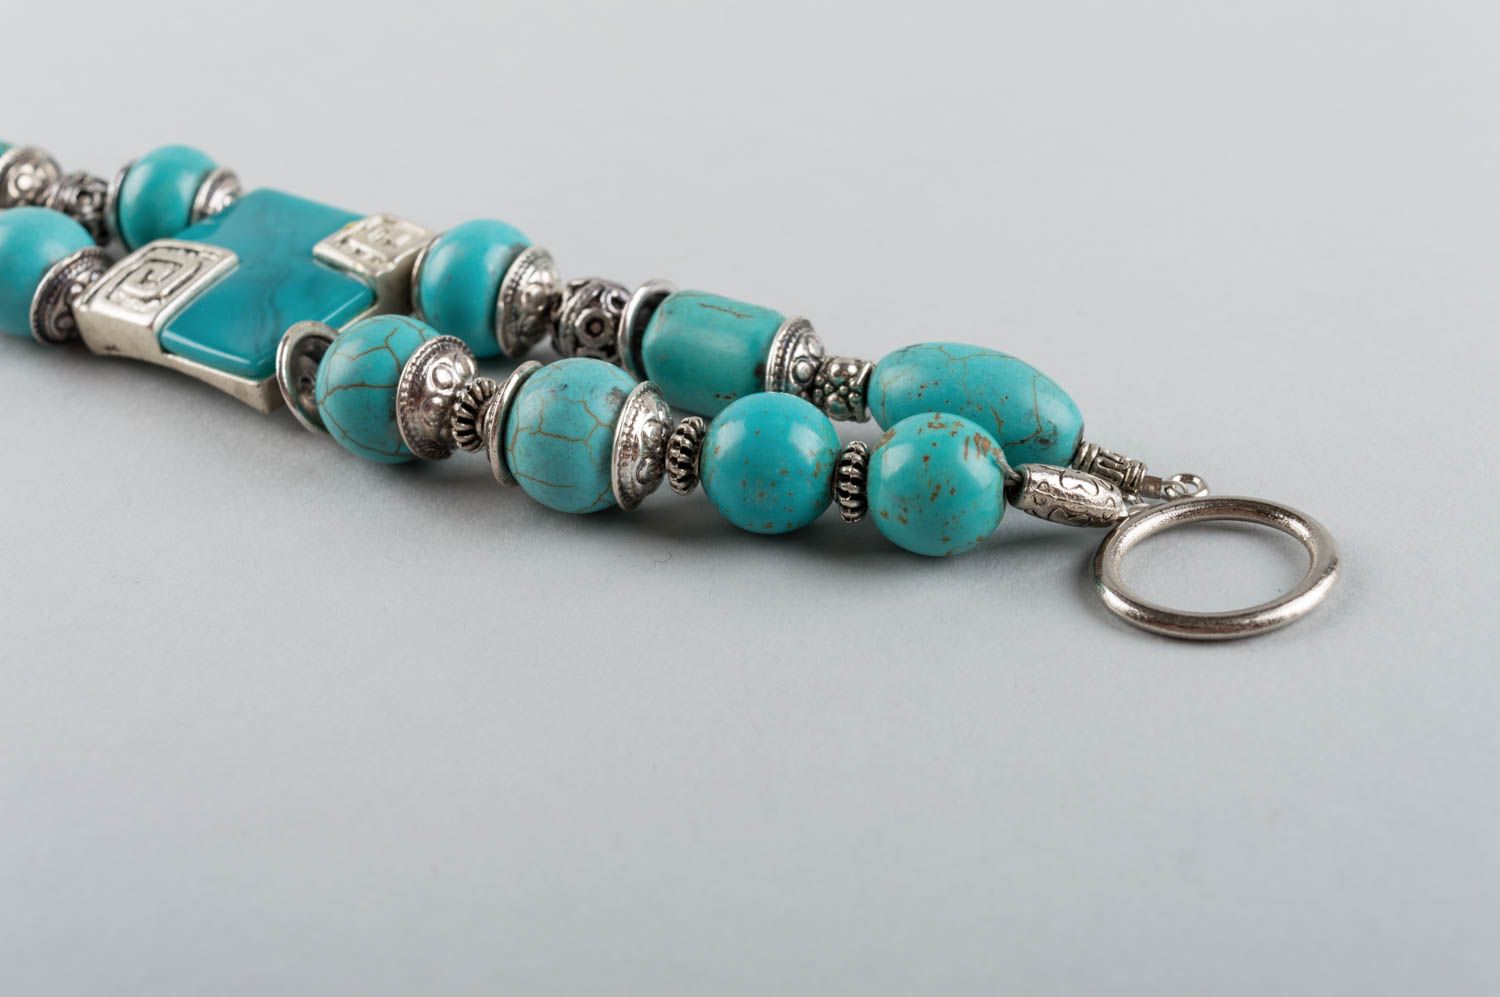 Handmade jewelry made of natural stones bracelet made of turquoise and brass photo 5